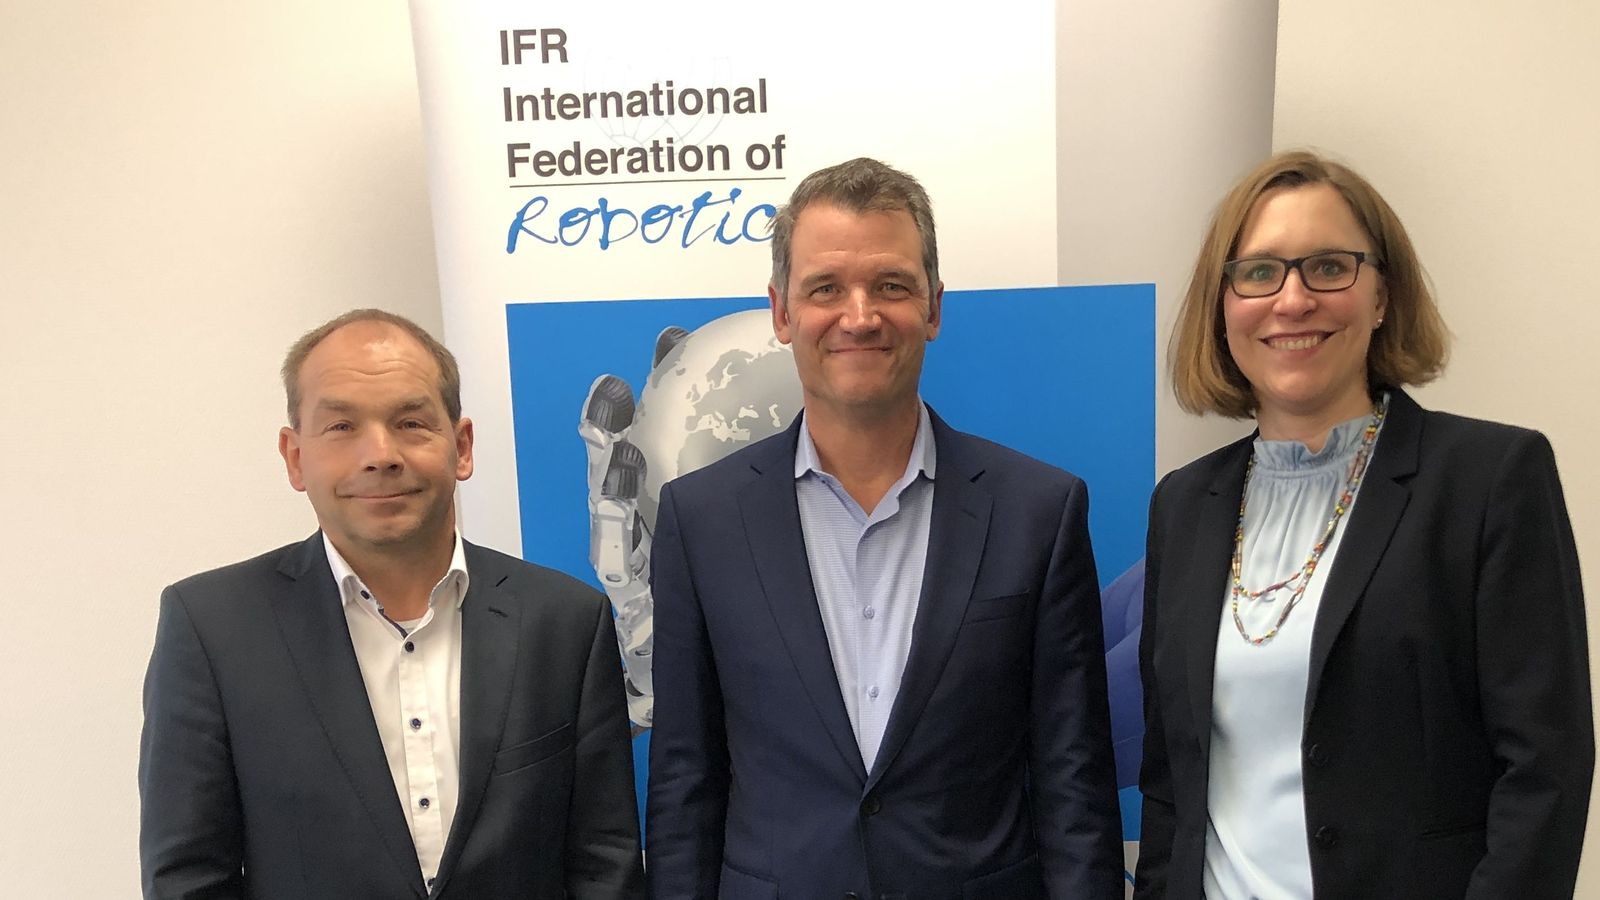 From left to right: Armin Schlenk, chairman of IFR Marcom Group, Milton Guerry, IFR president and Susanne Bieller, IFR general secretary.